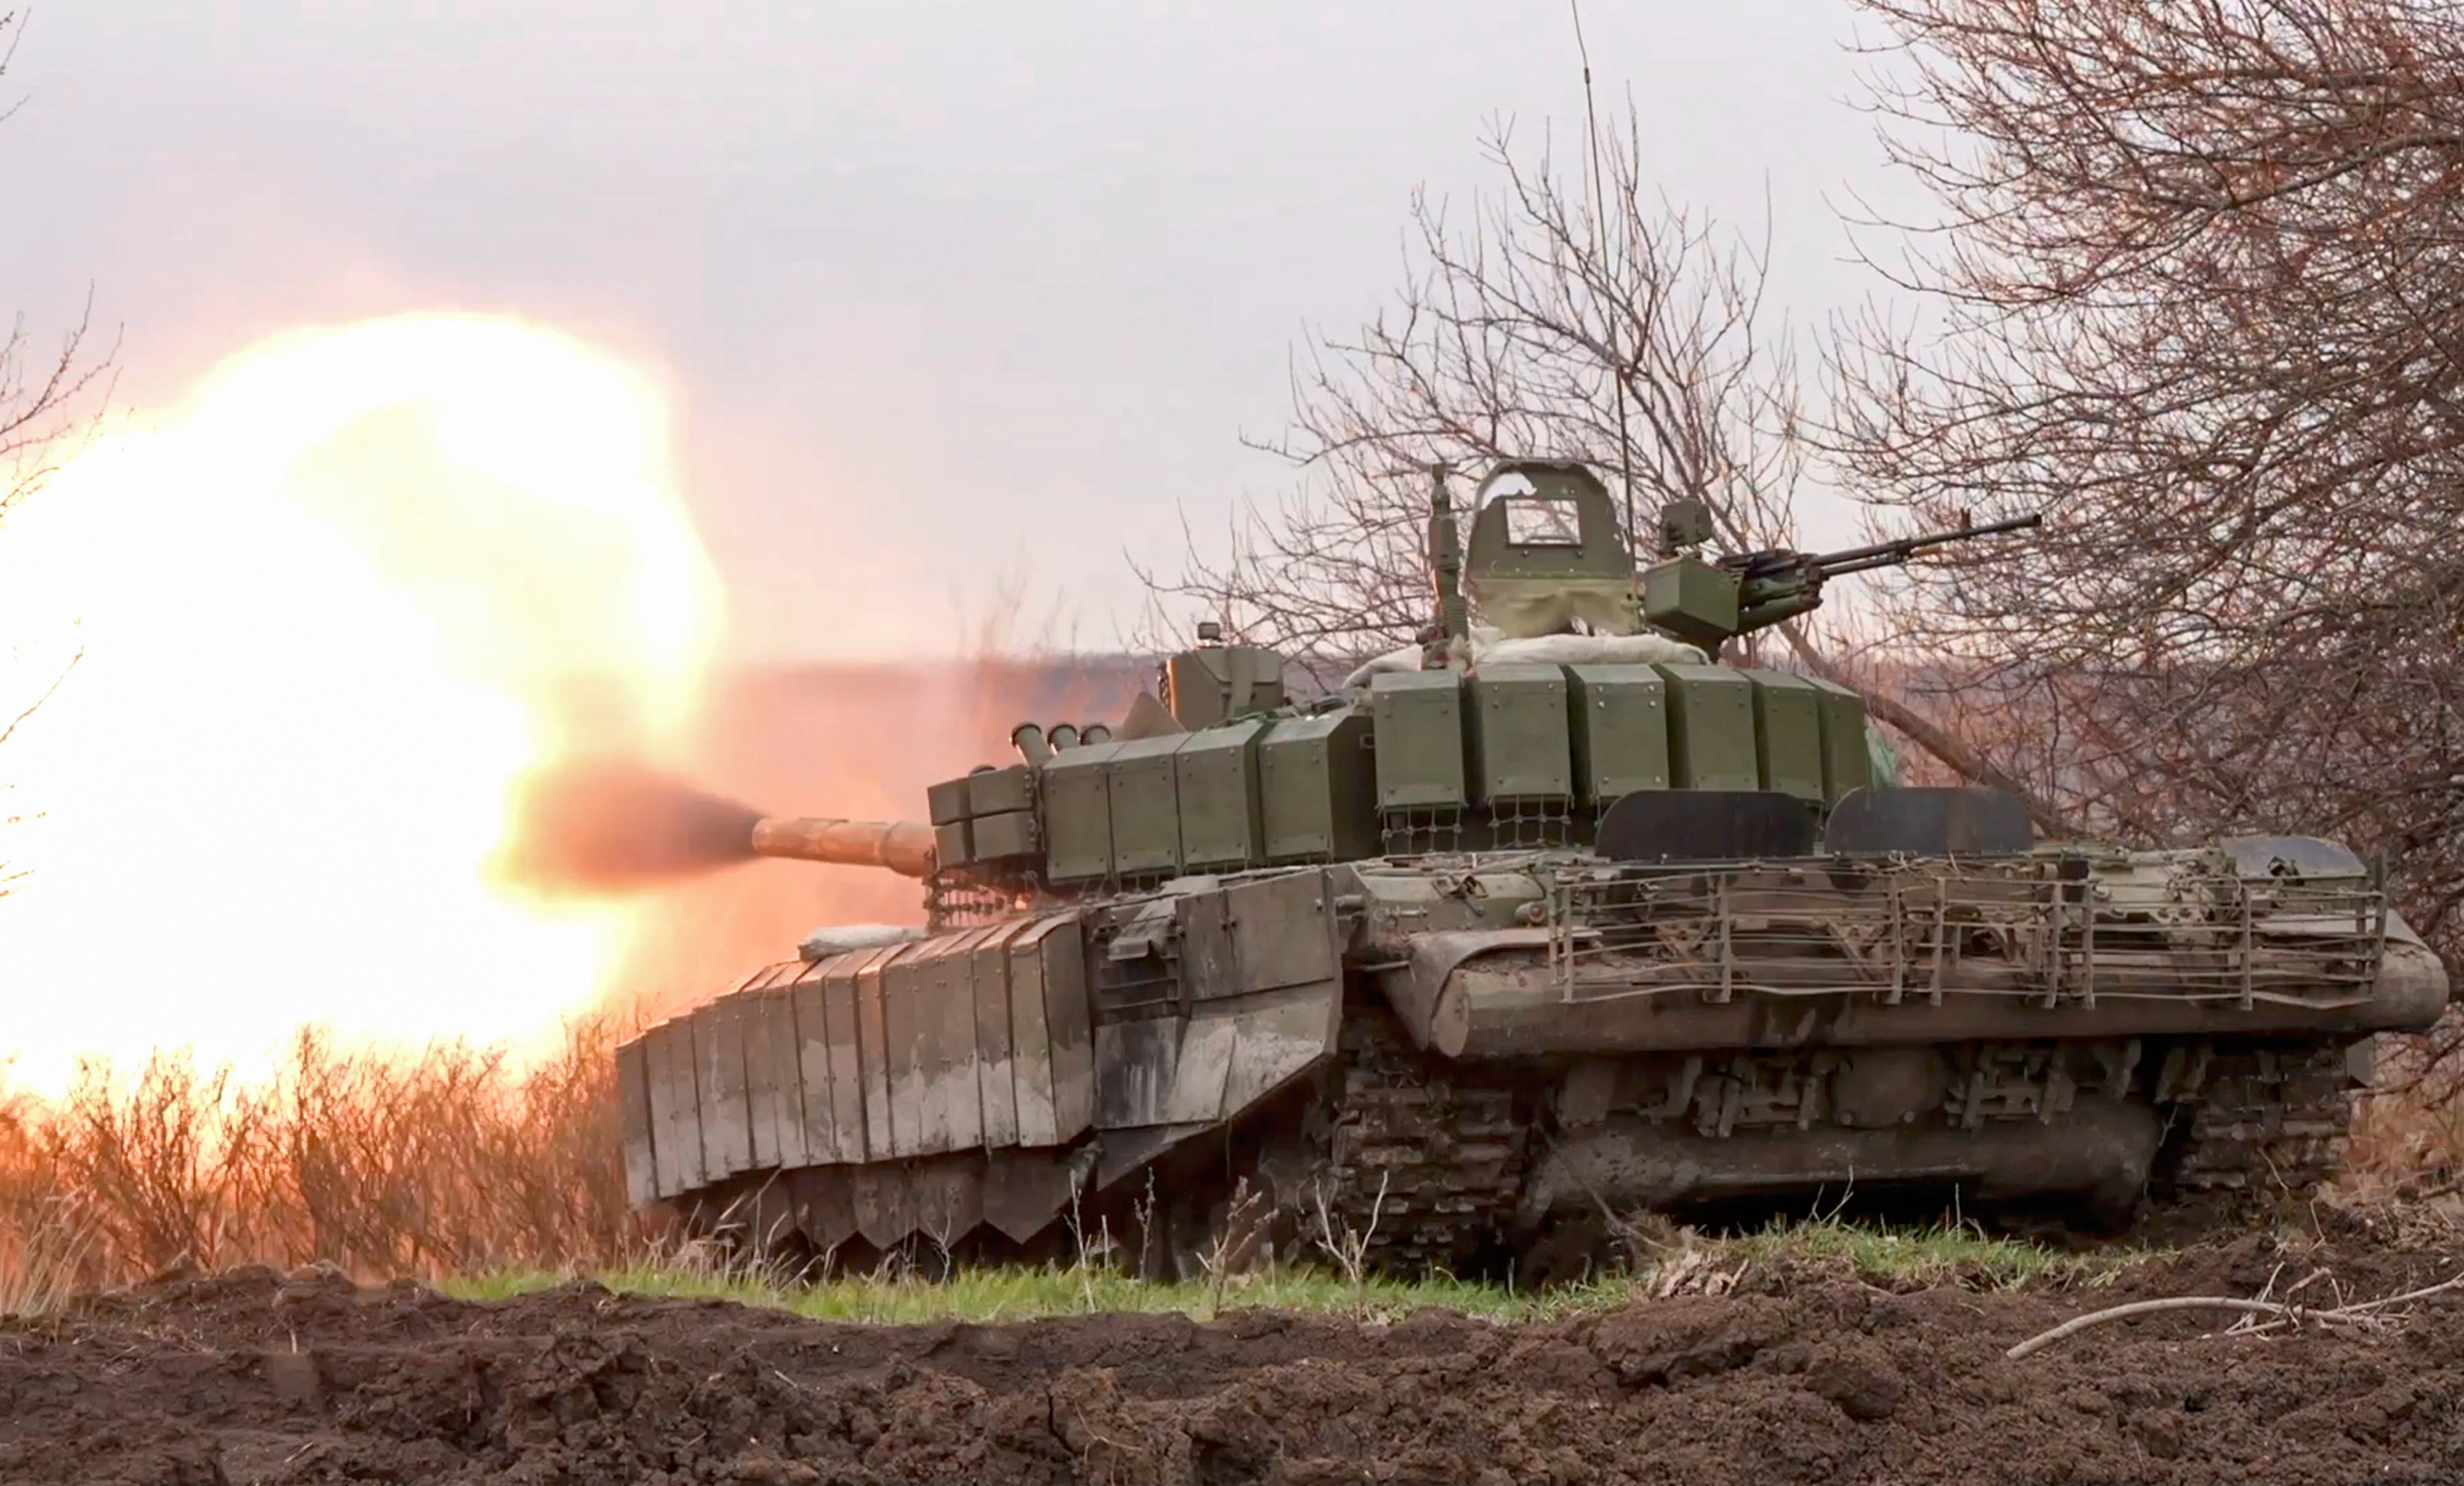 A Russian tank fires at Ukrainian positions on the front line earlier this year, in an image provided by the Russian defence ministry